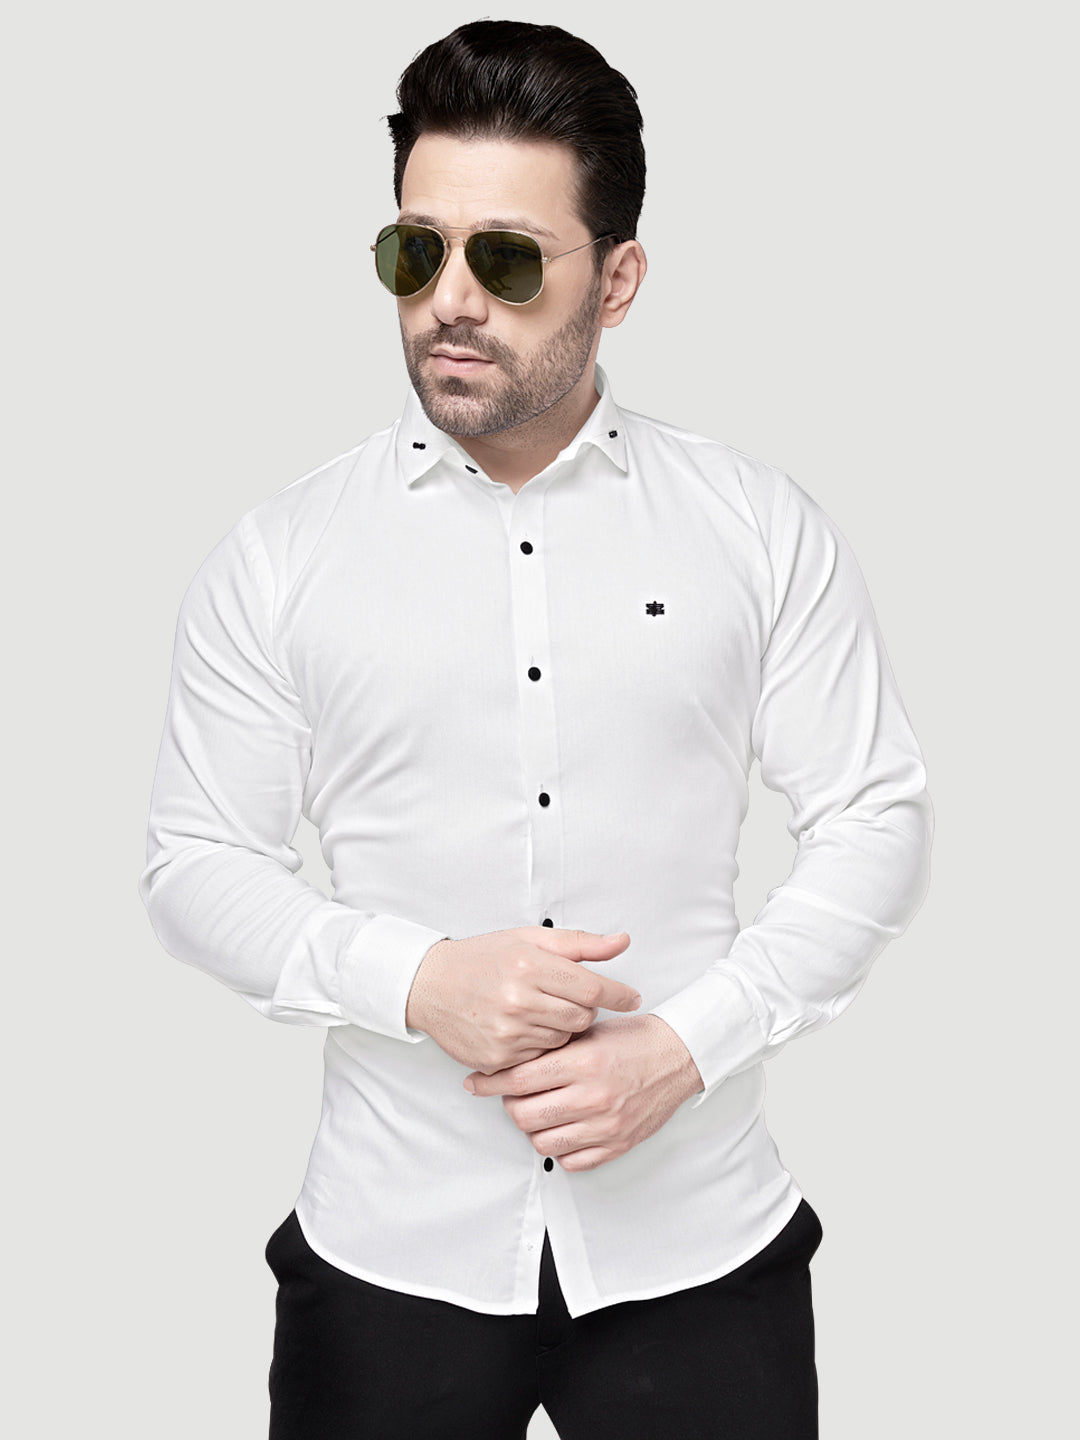 Black and White Designer Shirts with Collar Accessory & Metal Broach-7